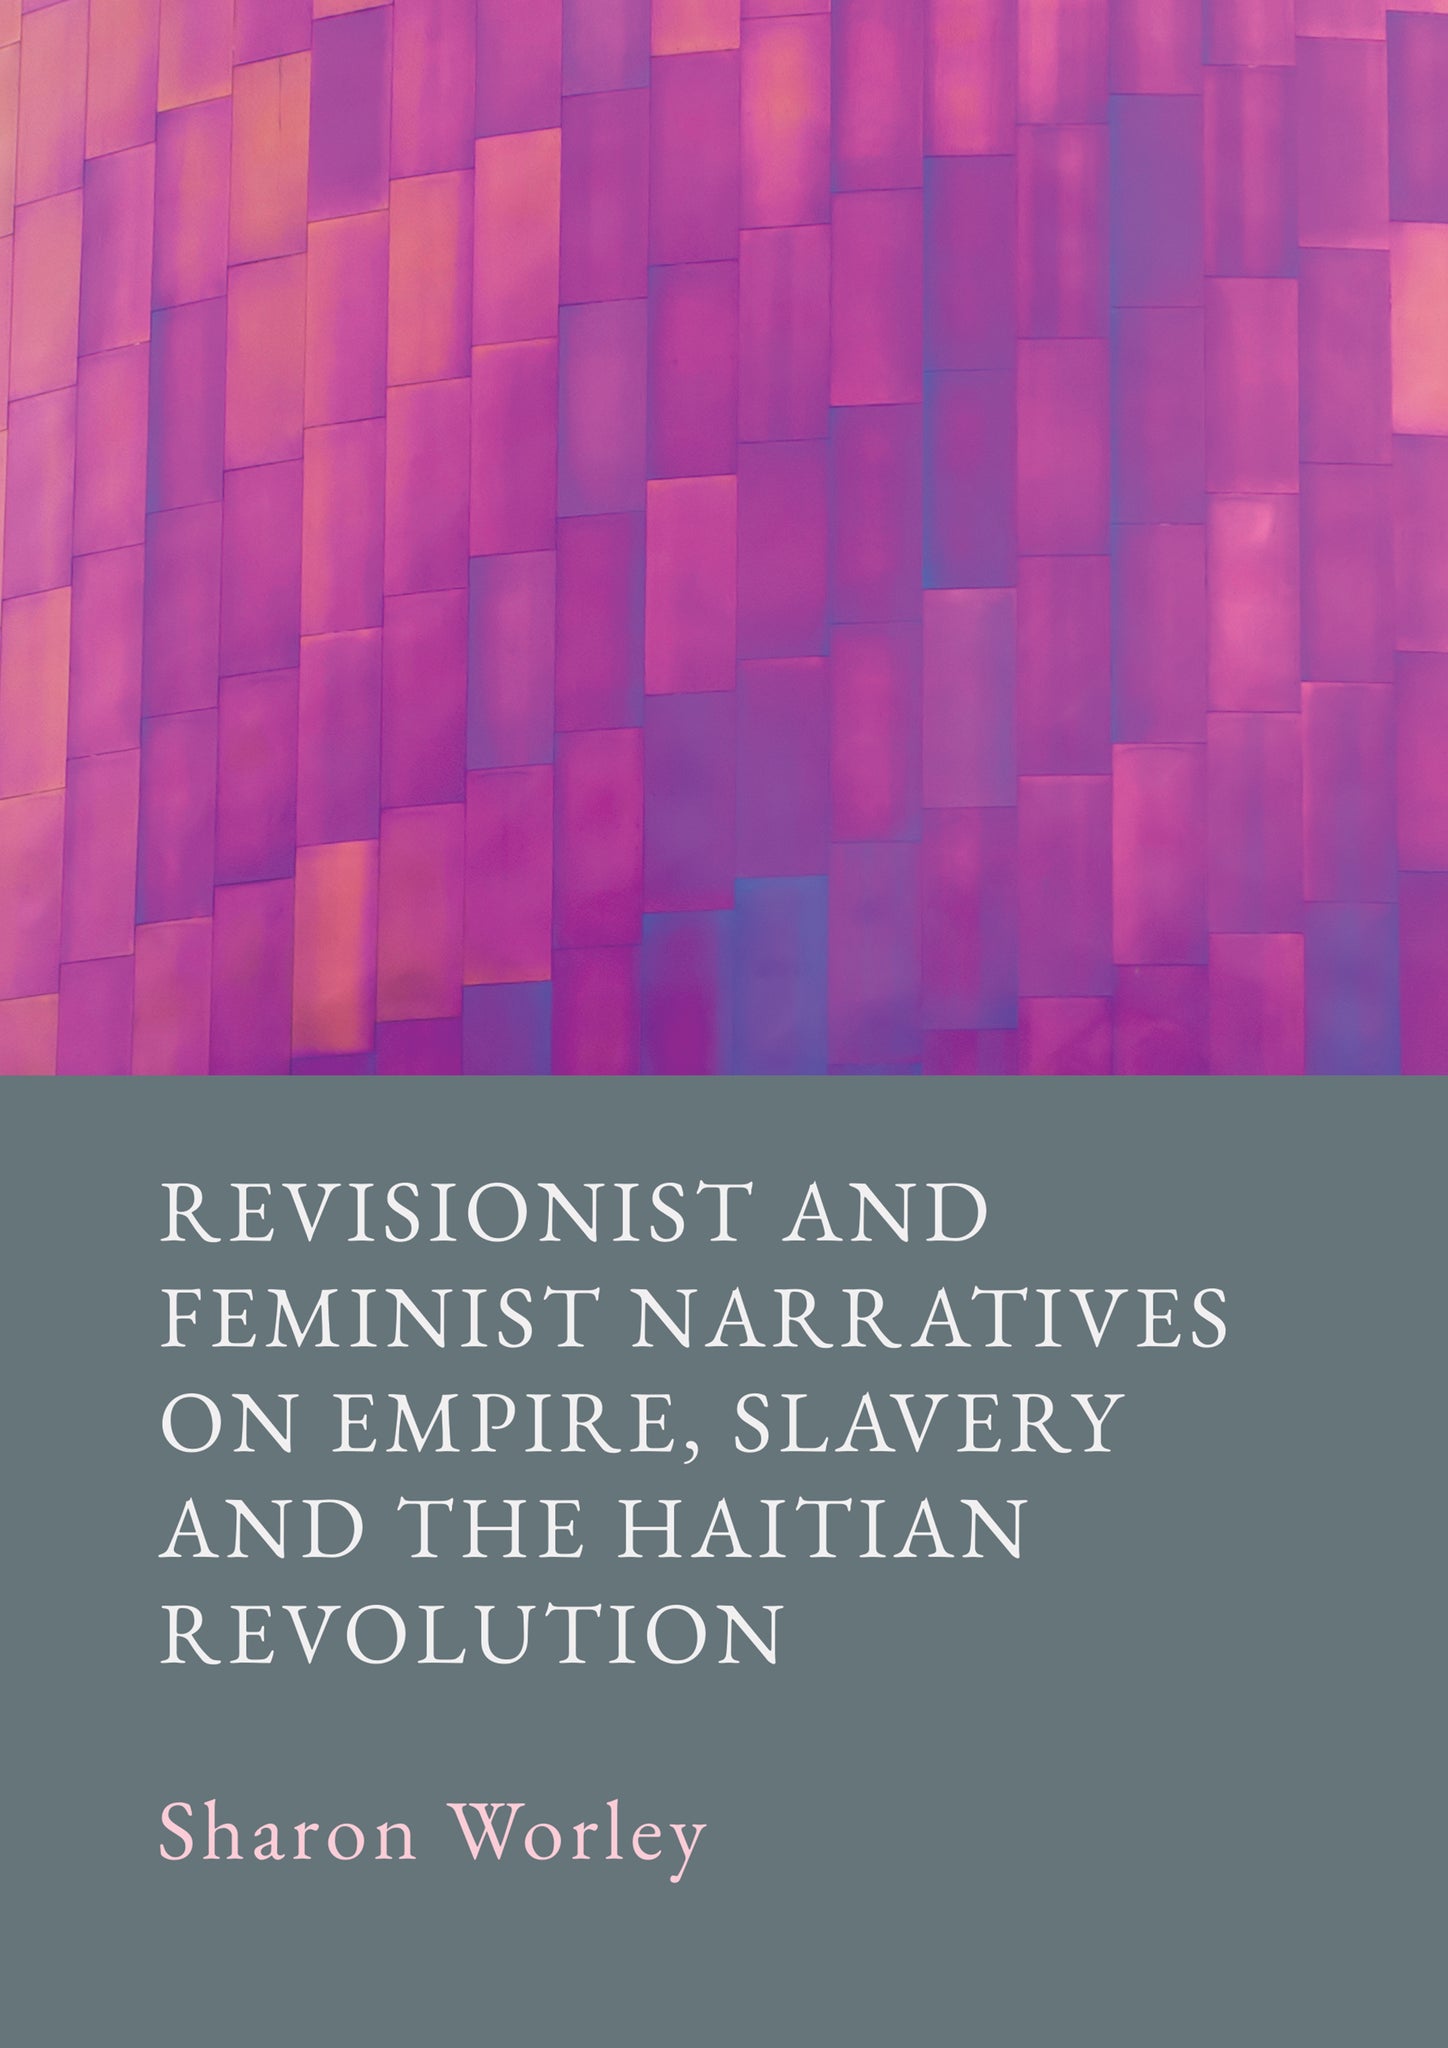 Revisionist and Feminist Narratives on Empire, Slavery and the Haitian Revolution